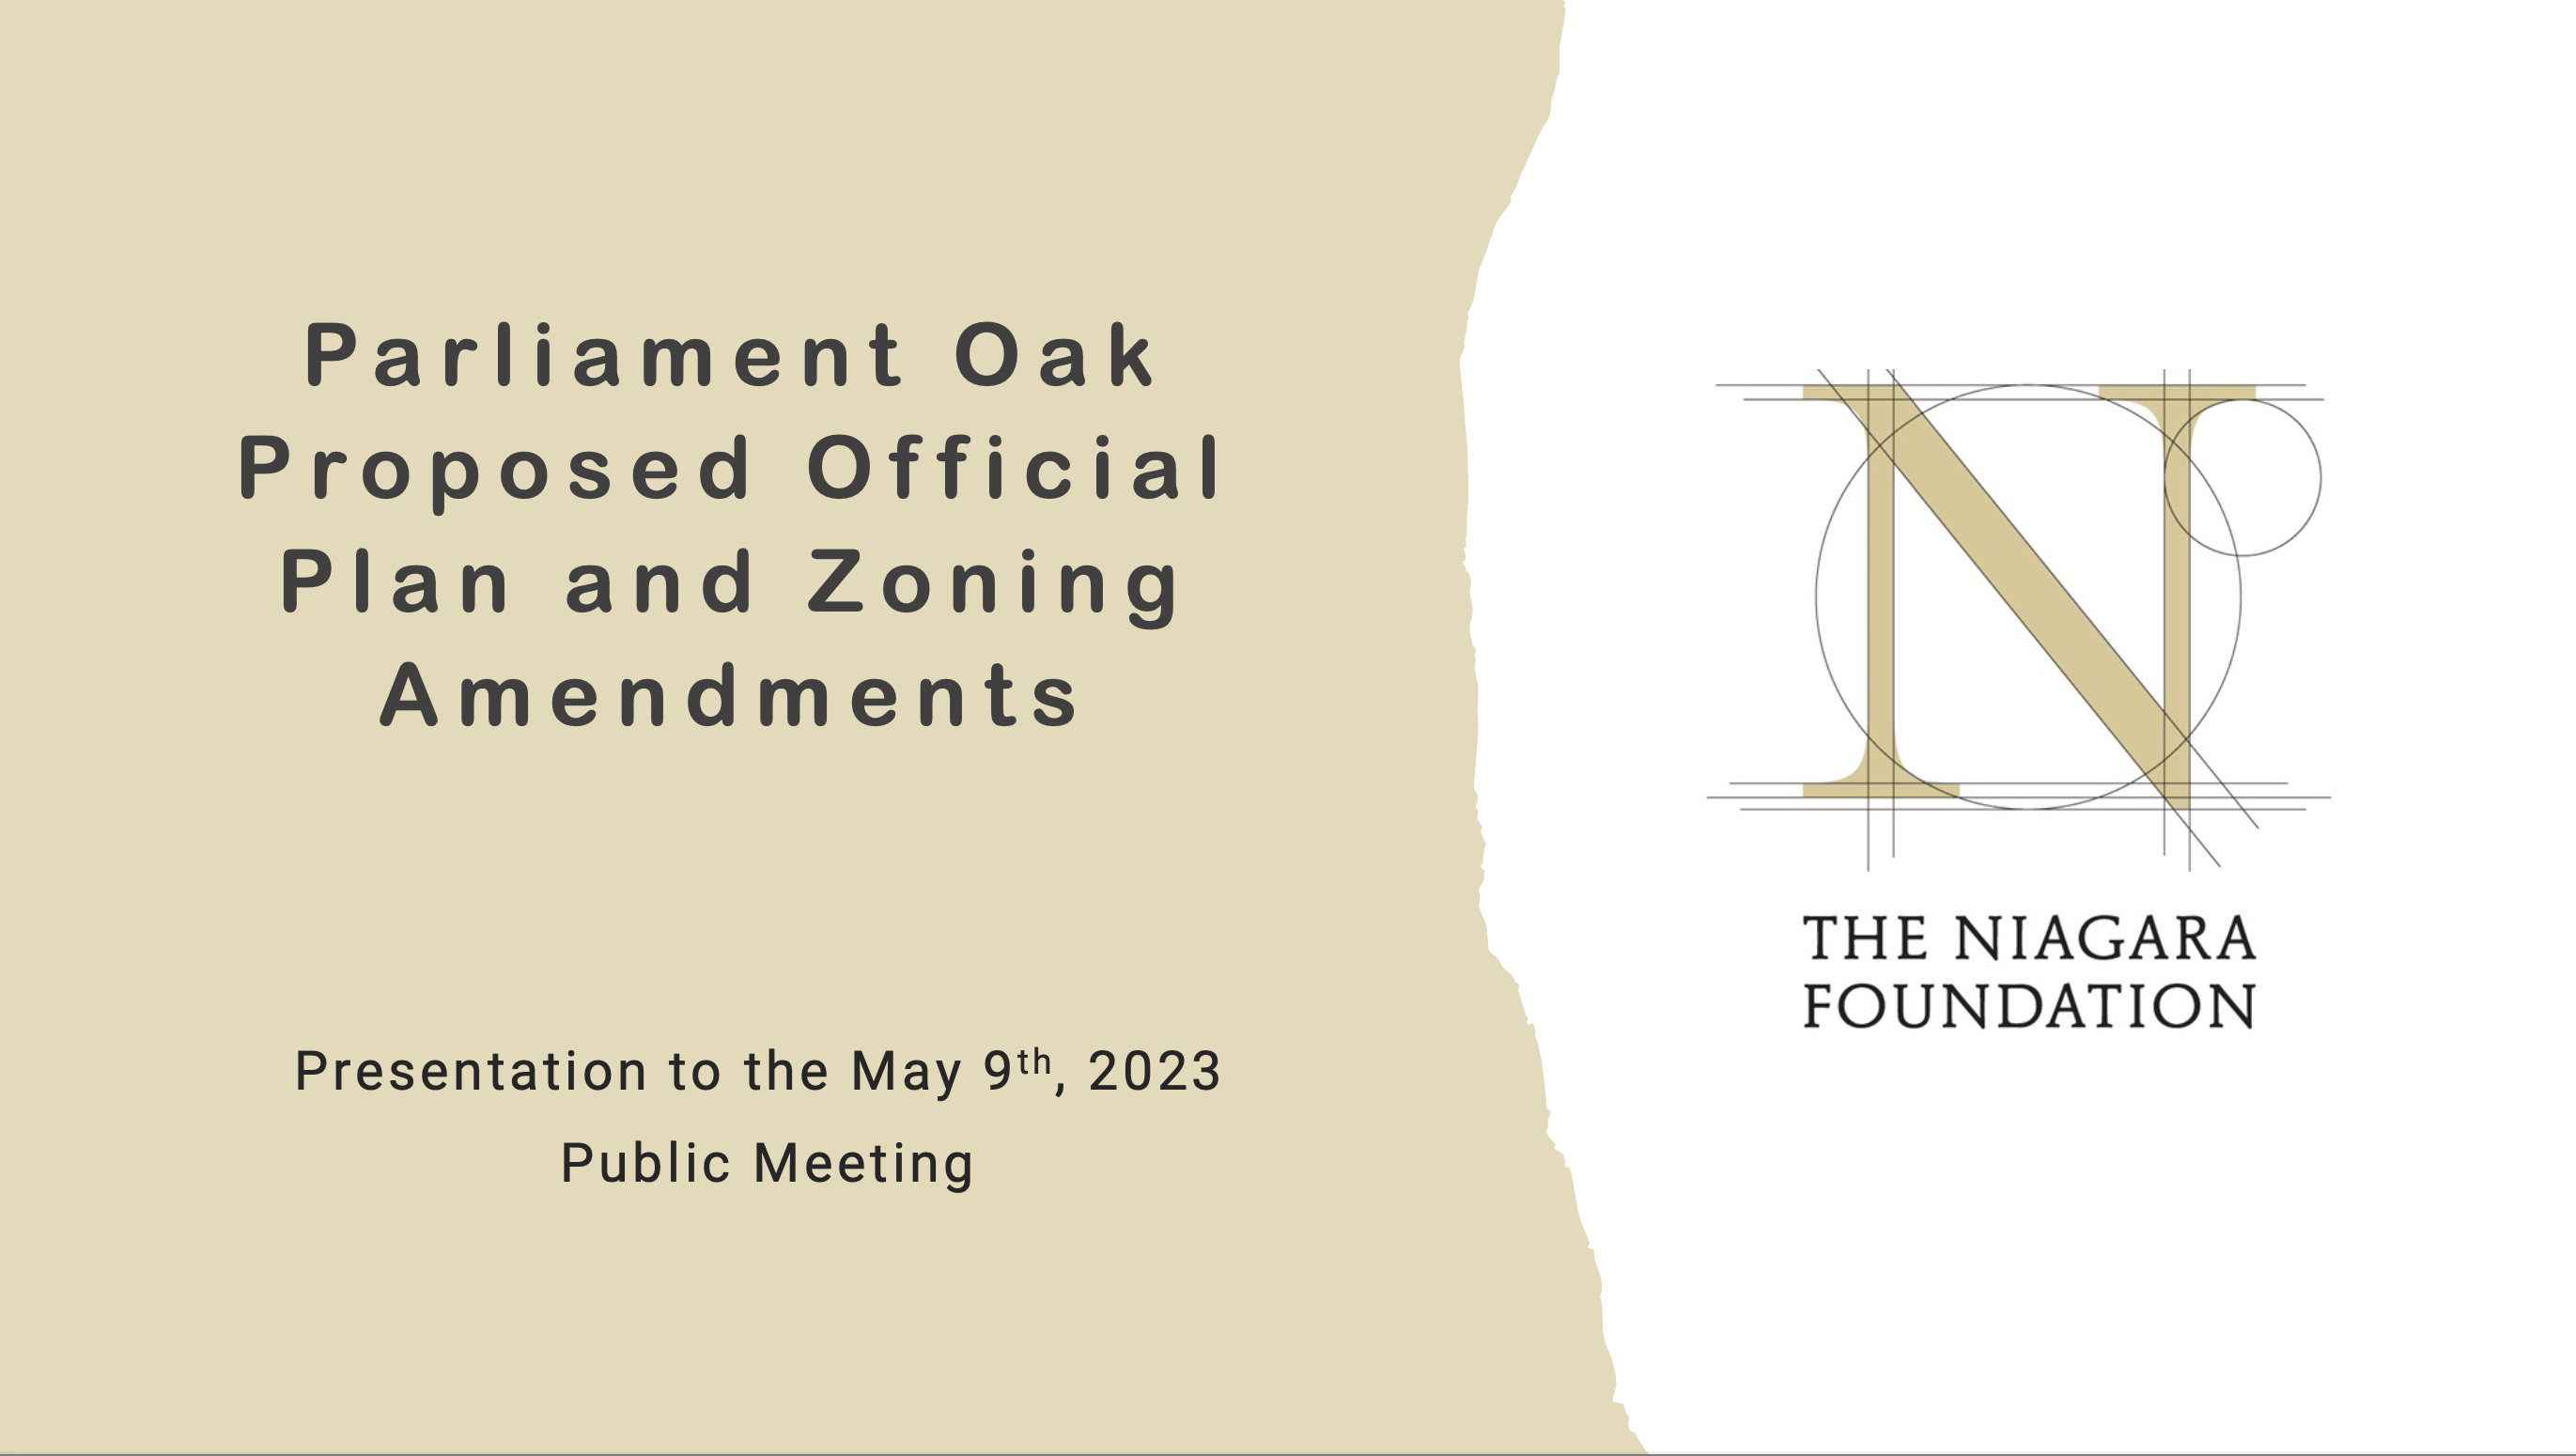 Parliament Oak Proposed Official Plan and Zoning Amendments